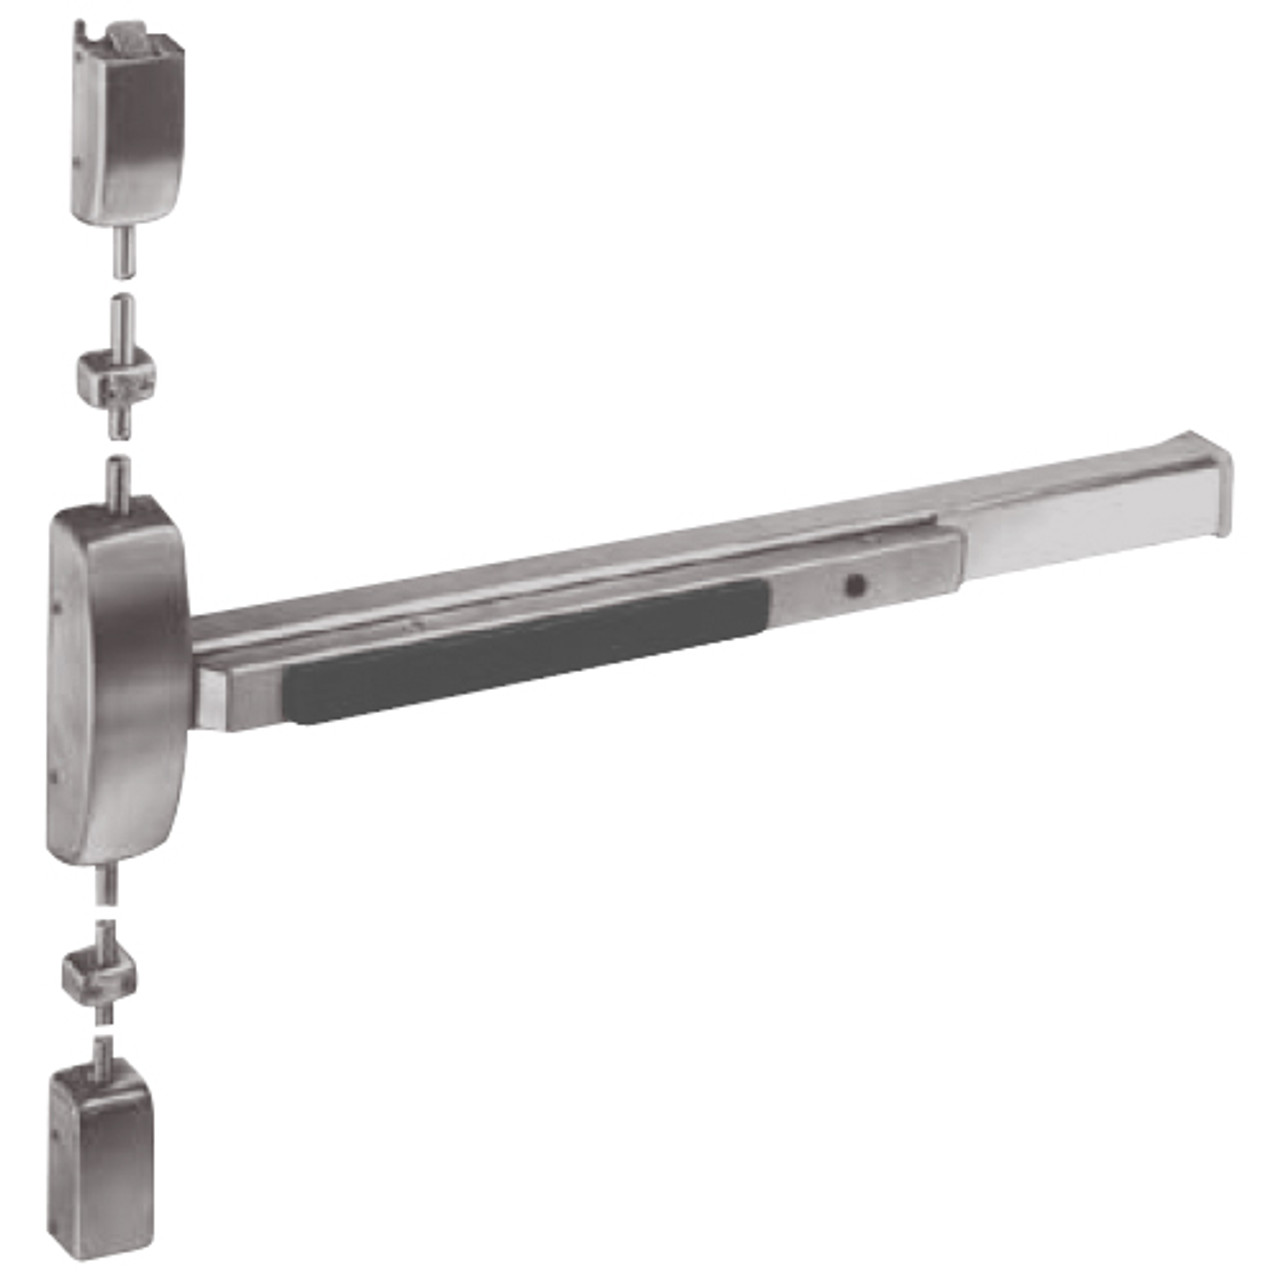 8710J-LHR-32D Sargent 80 Series Exit Only Surface Vertical Rod Exit Device in Satin Stainless Steel